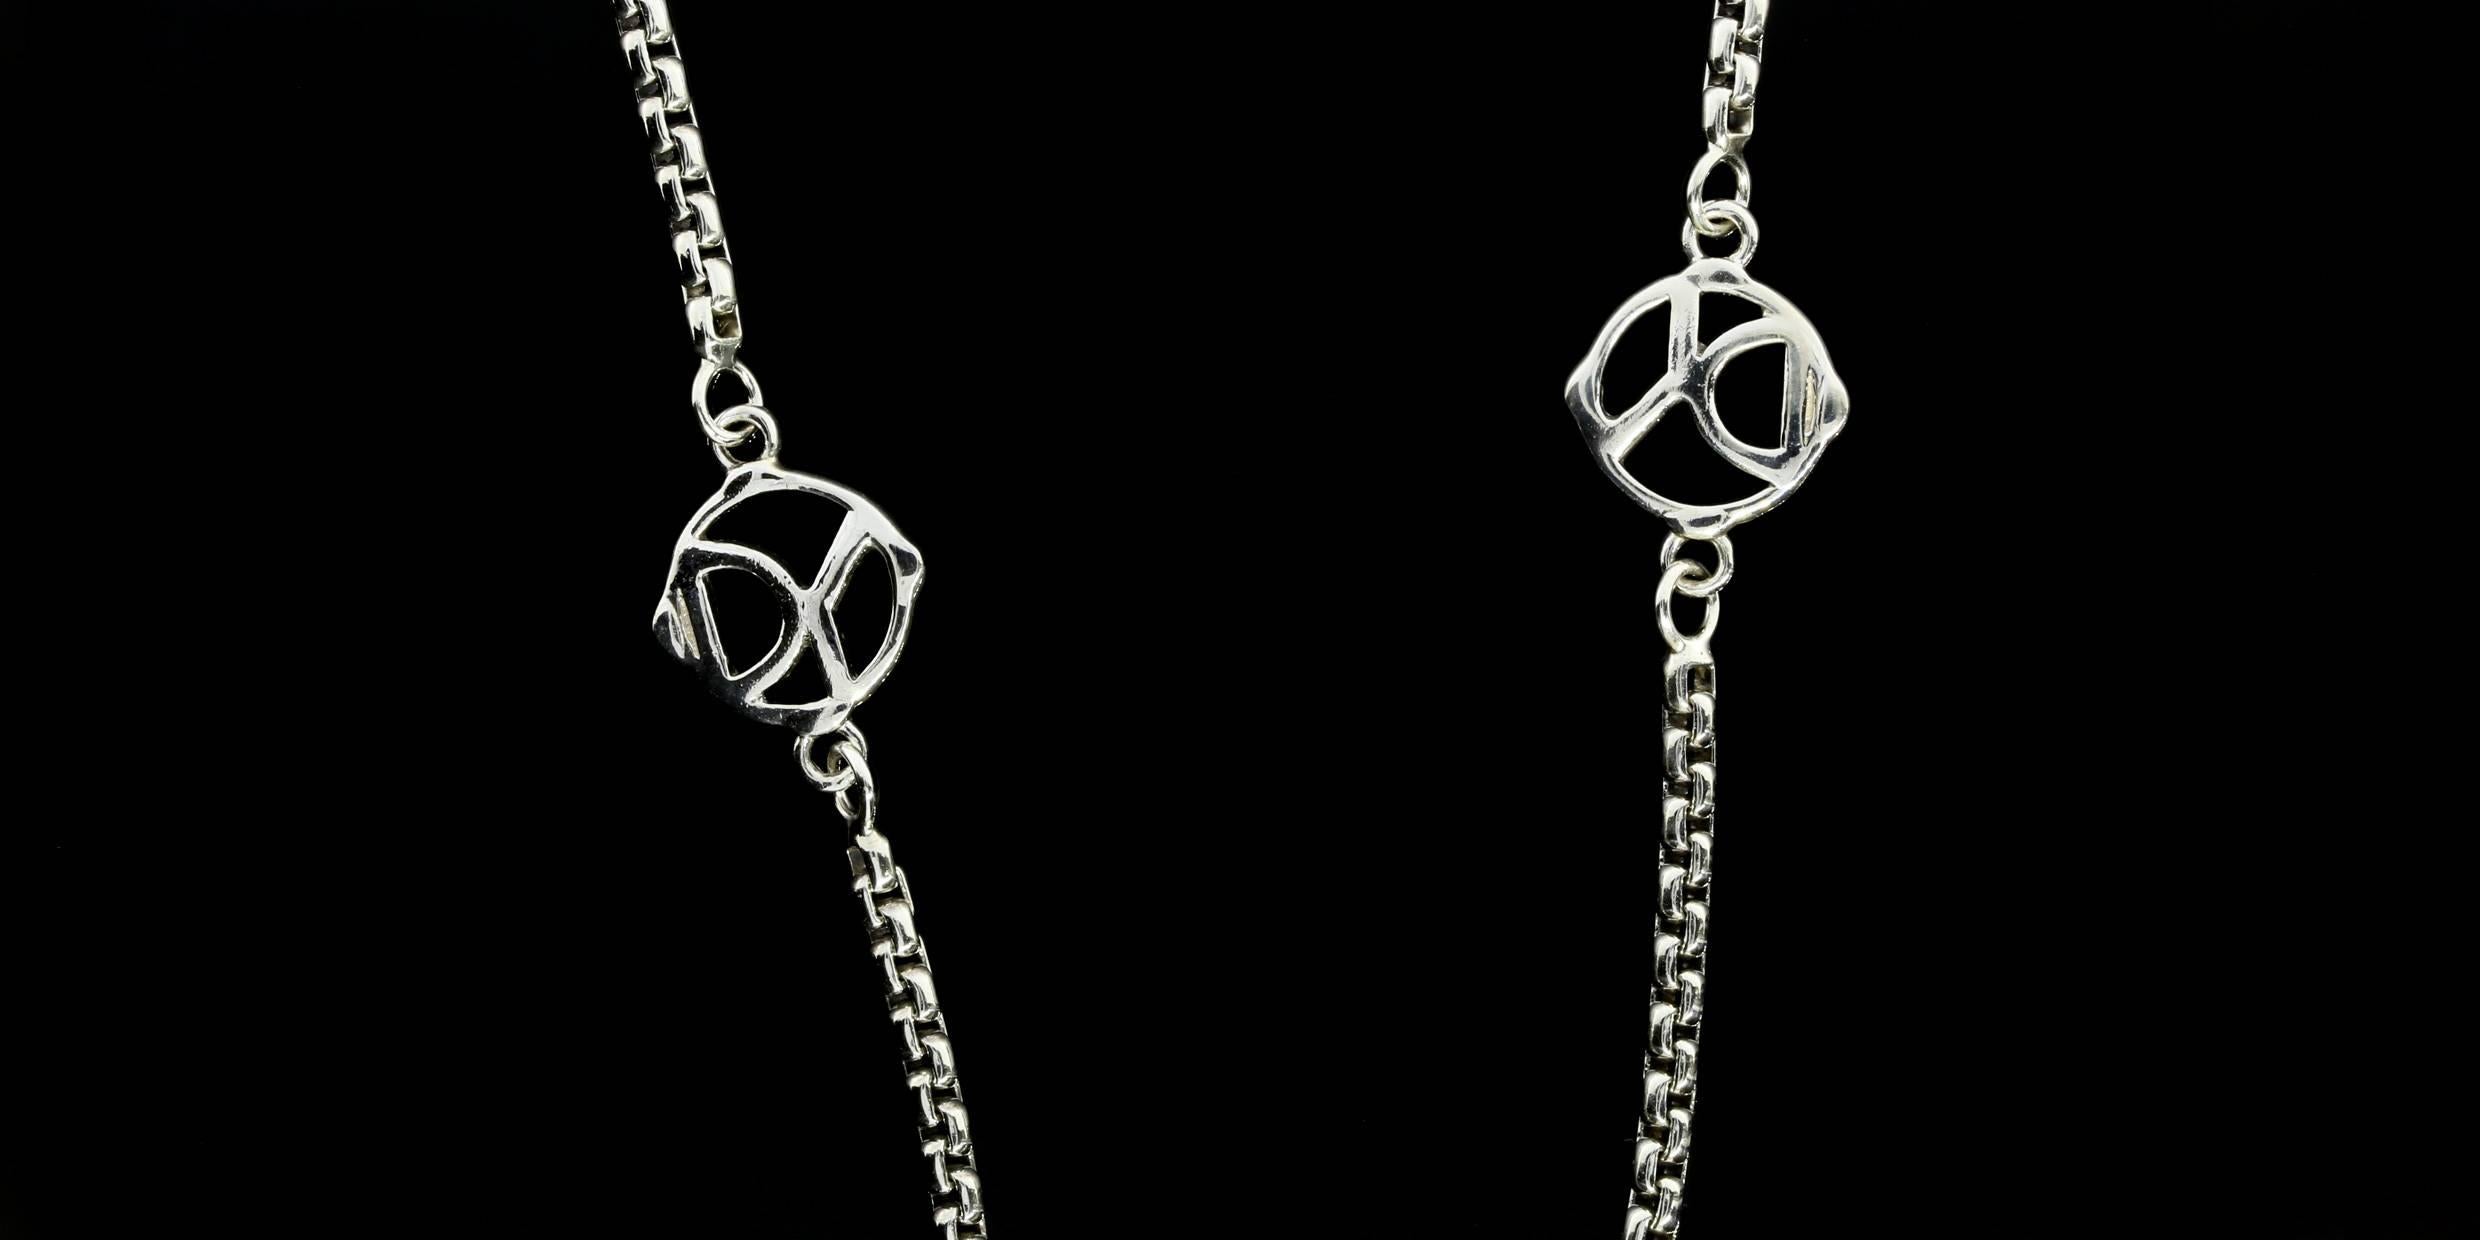 This David Yurman logo chain is a versatile piece of jewelry. The necklace is a sterling silver box chain with 6 